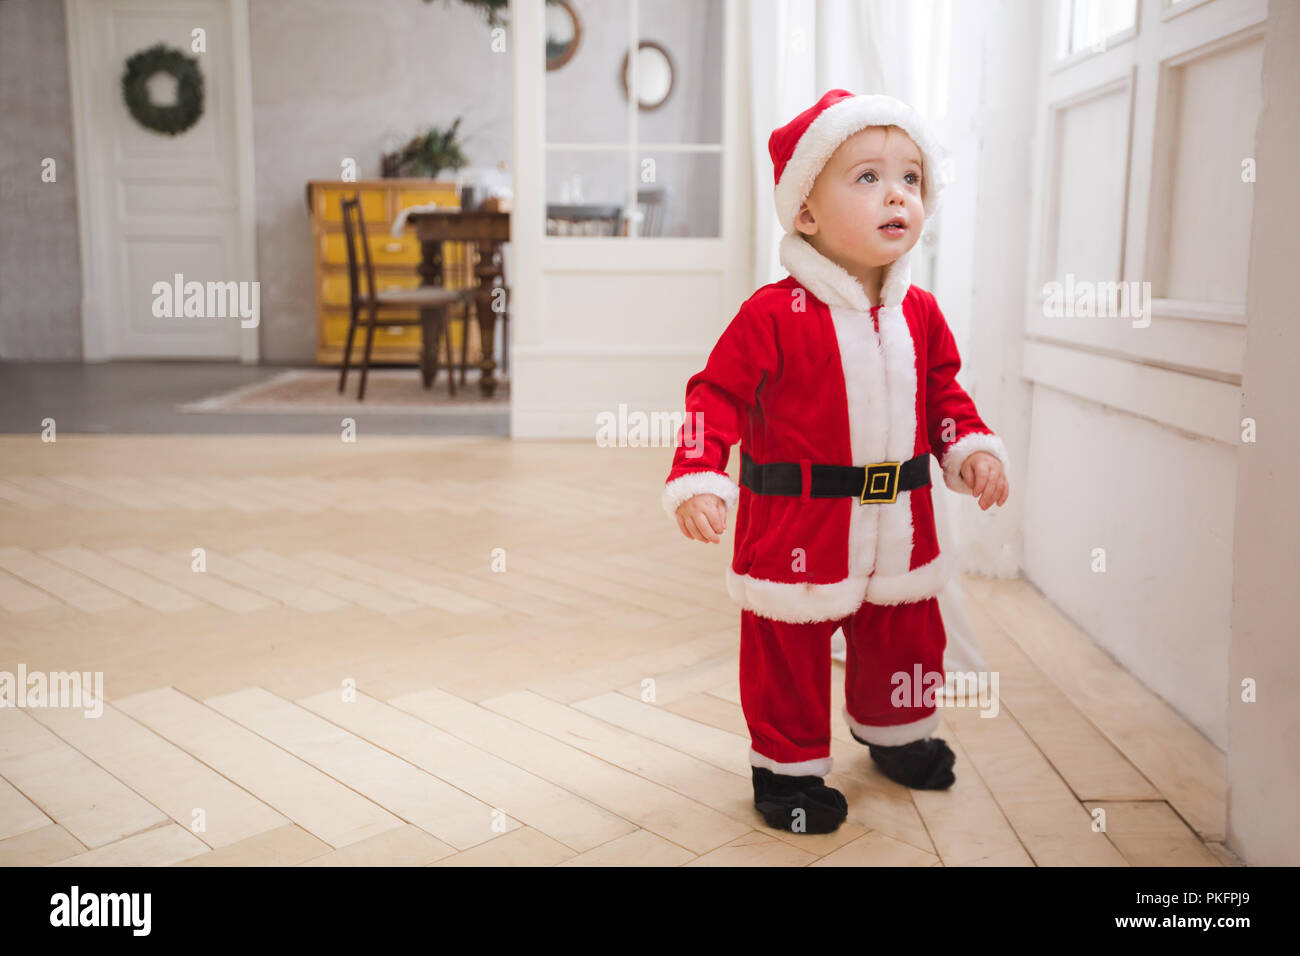 Little boy in Christmas costume standing in room Stock Photo